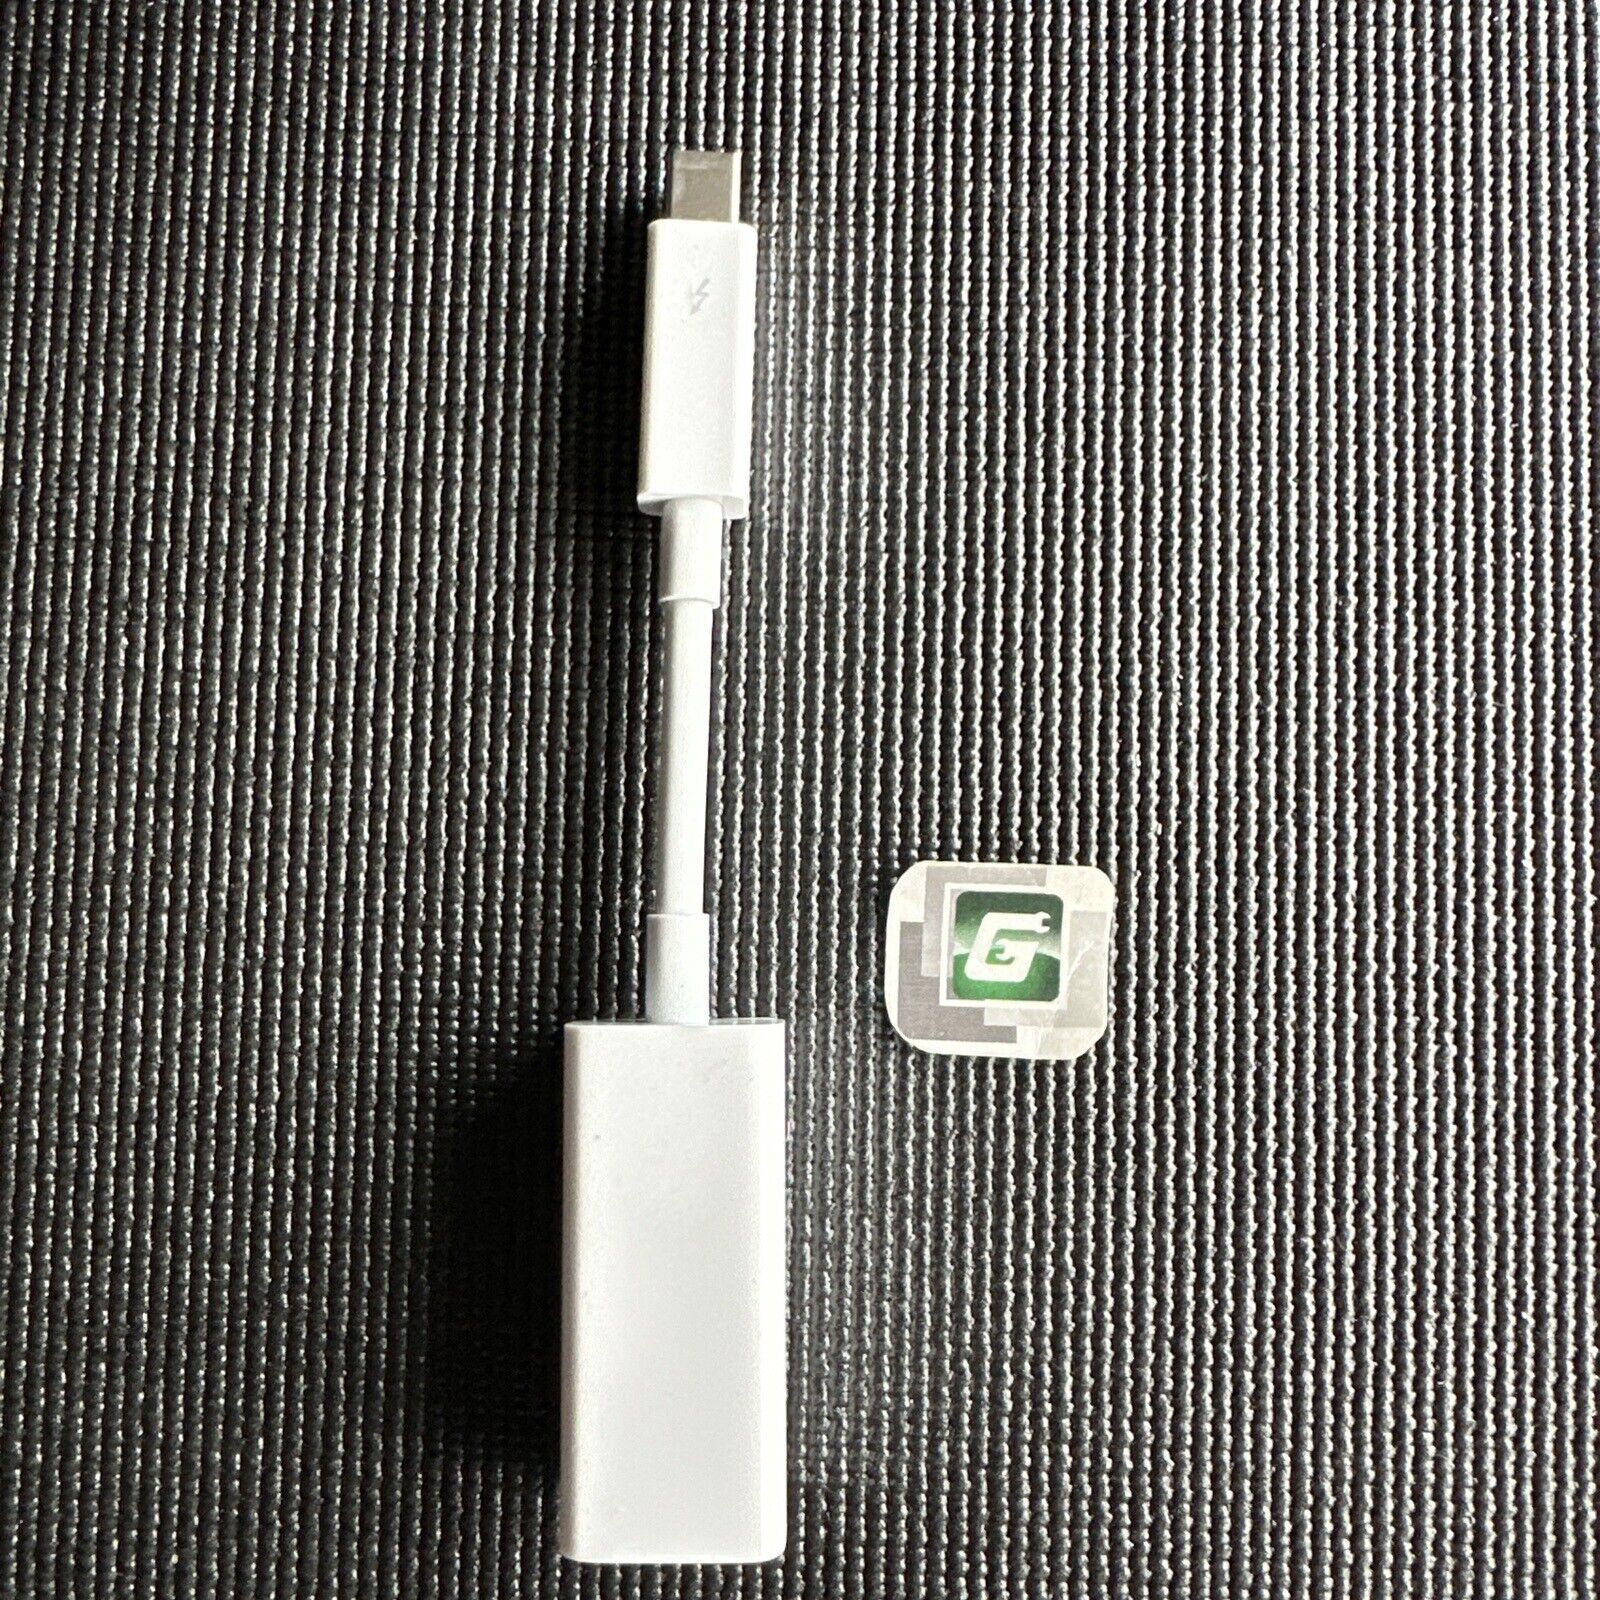 Apple Thunderbolt to Gigabit Ethernet Adapter MD463LL/A Open Box A1433 OEM Used